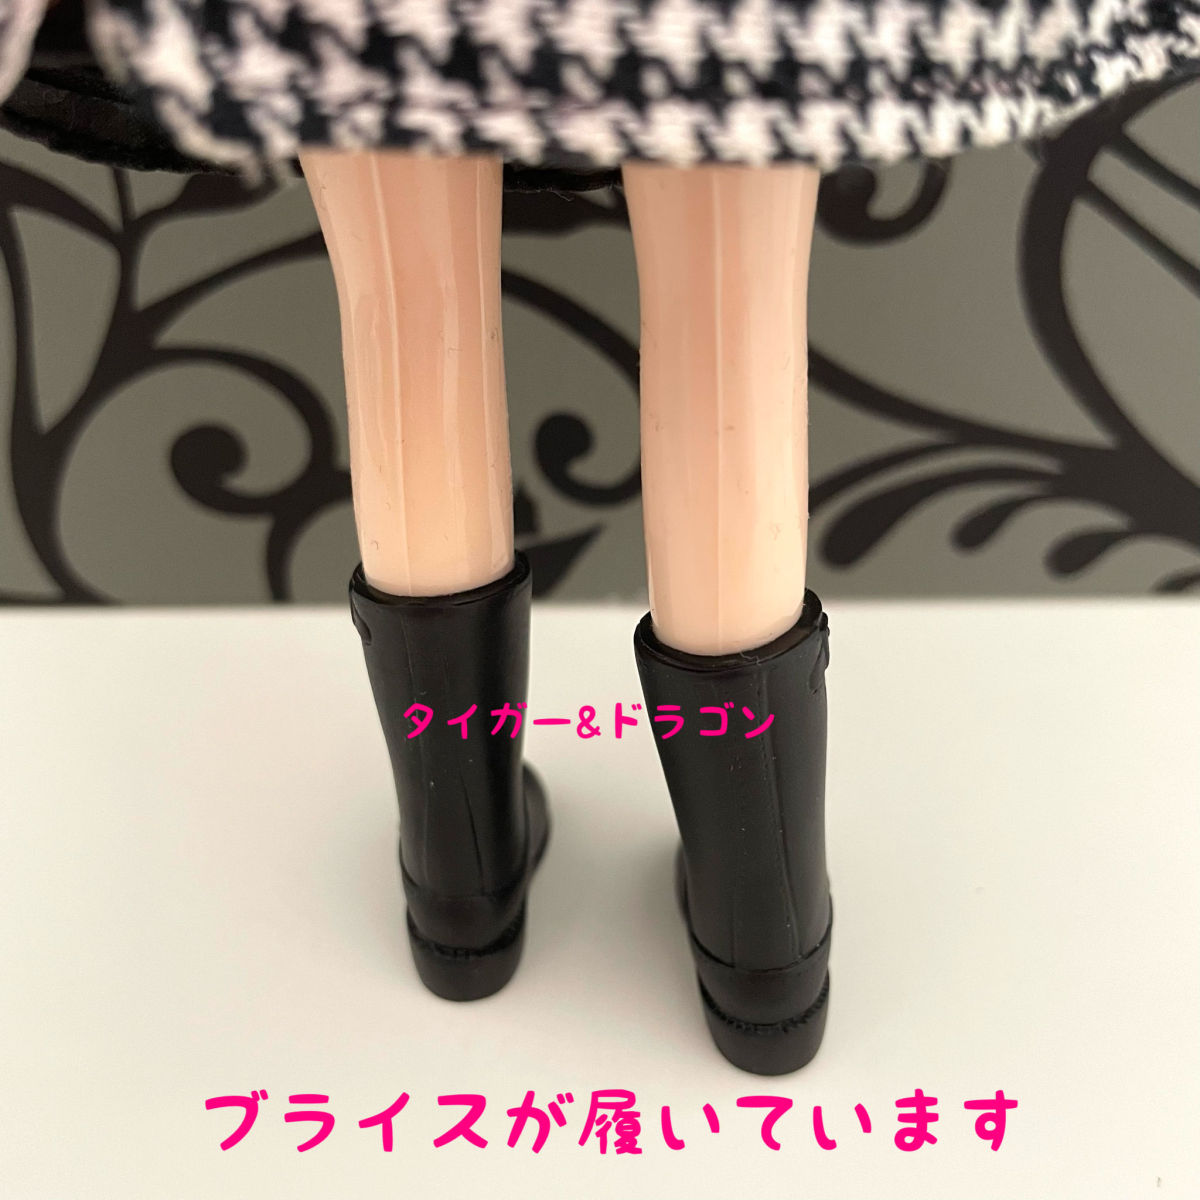  Licca-chan Blythe engineer boots boots shoes boots rain boots doll shoes clothes out Fit put on ...